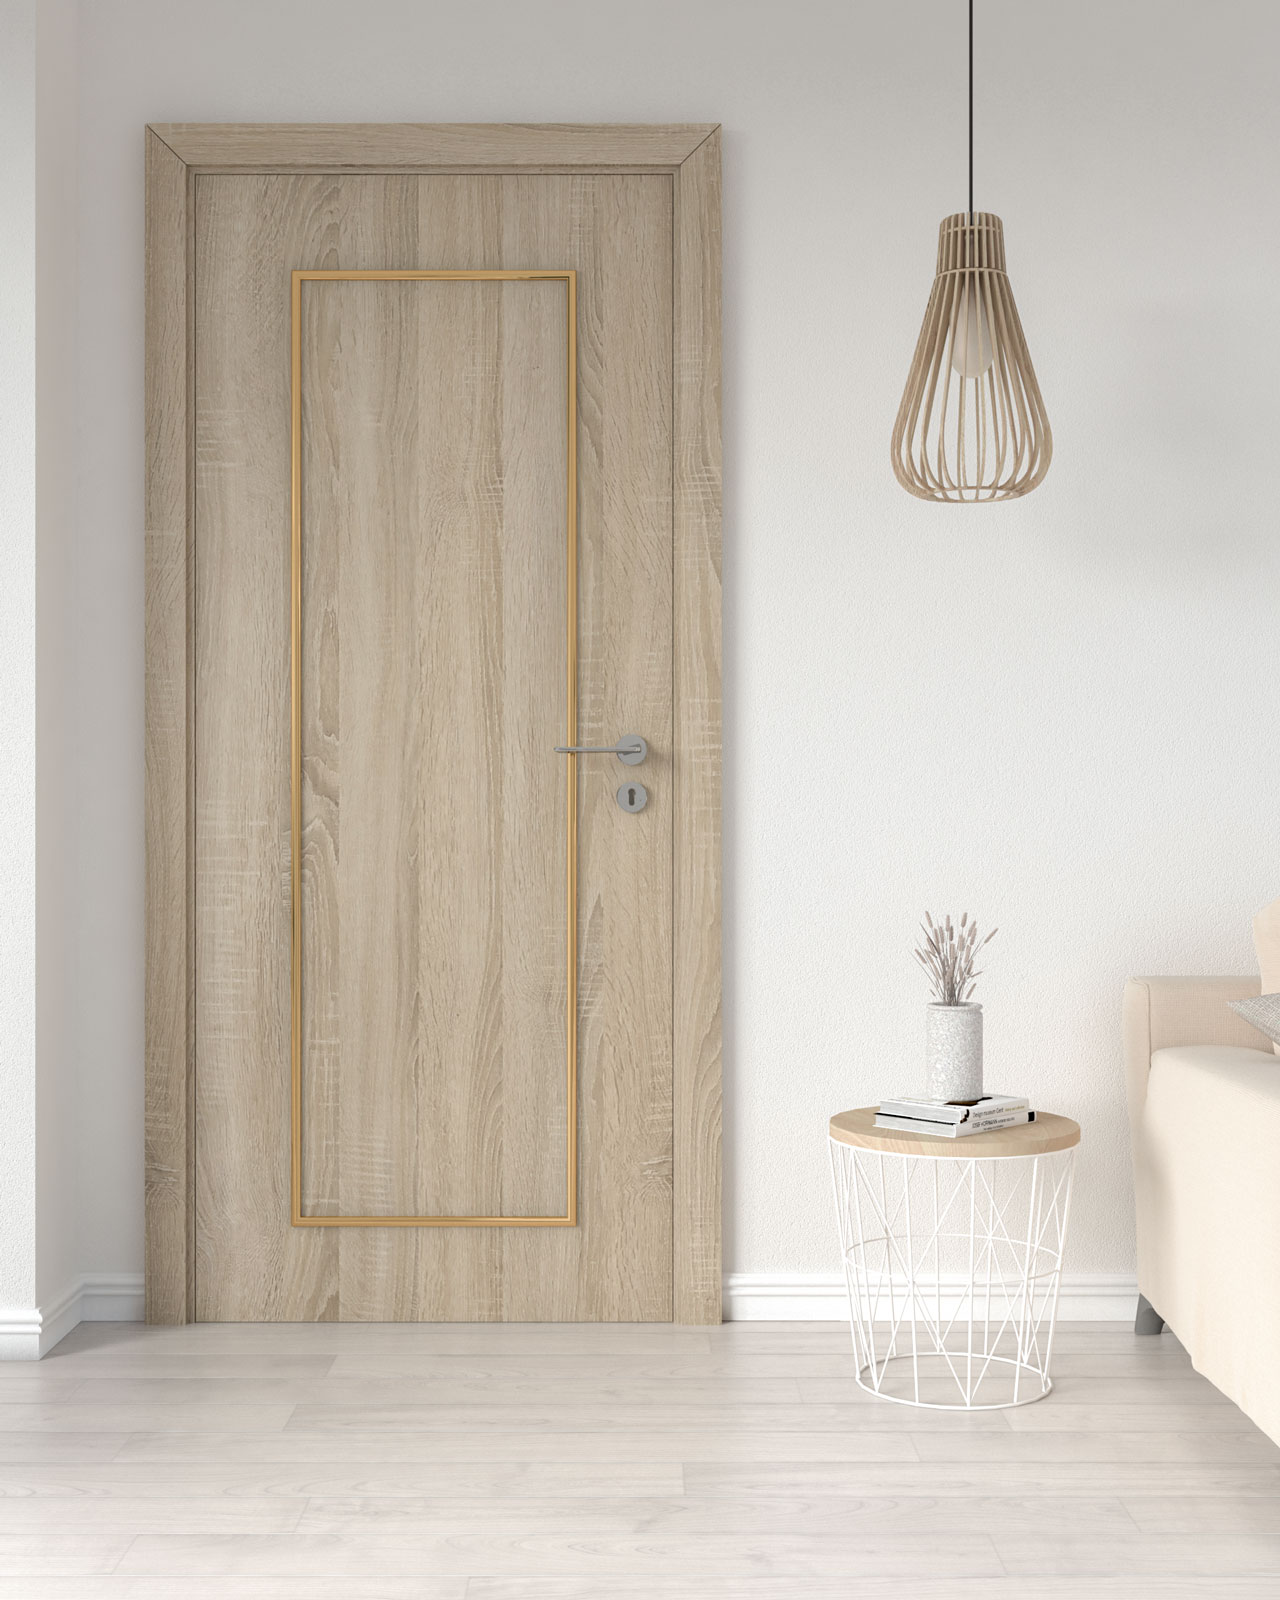 Glam wood and gold door